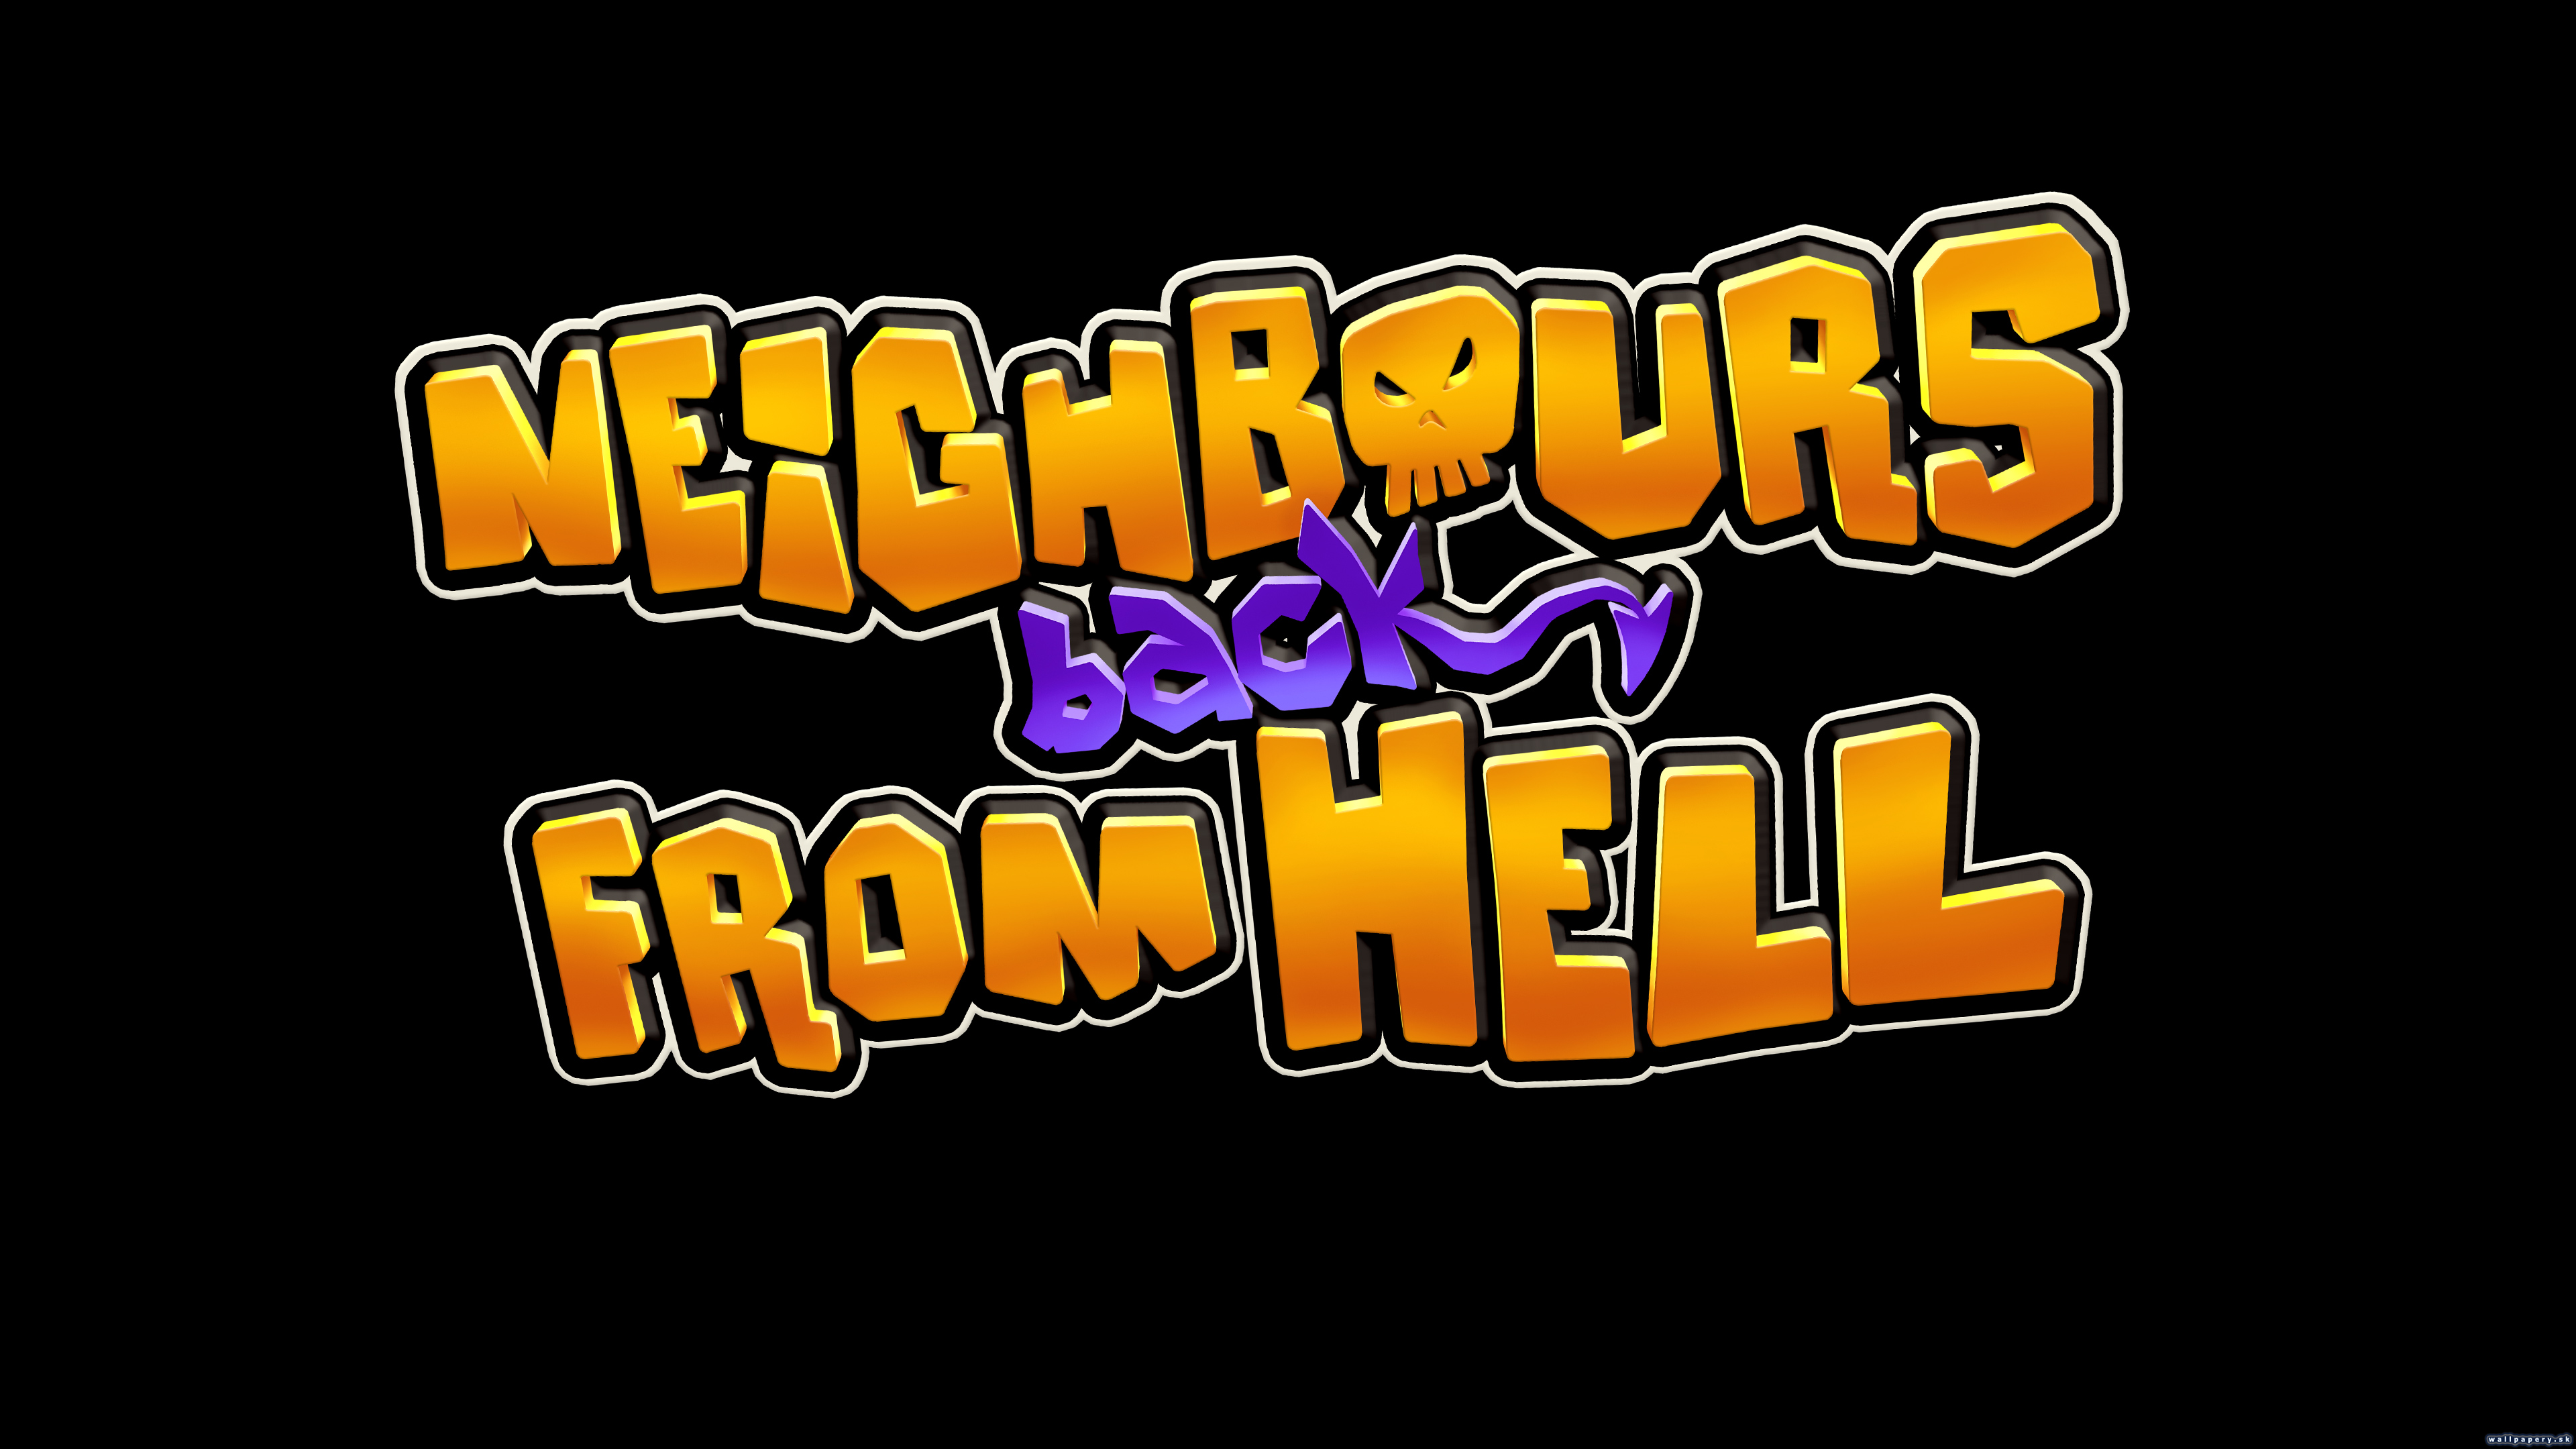 Neighbours back From Hell - wallpaper 3